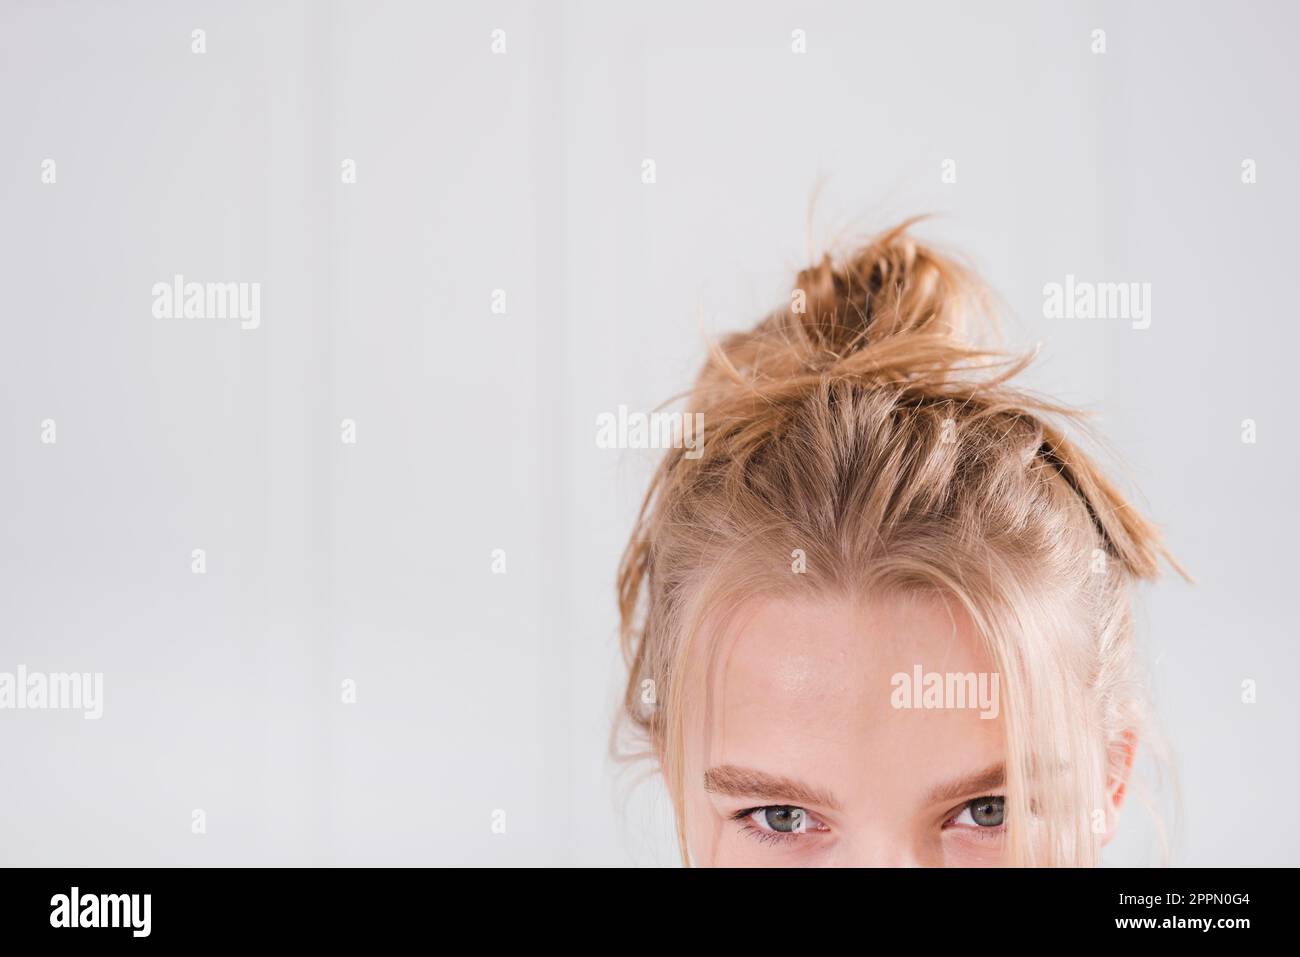 Blonde girl with messy bun Stock Photo